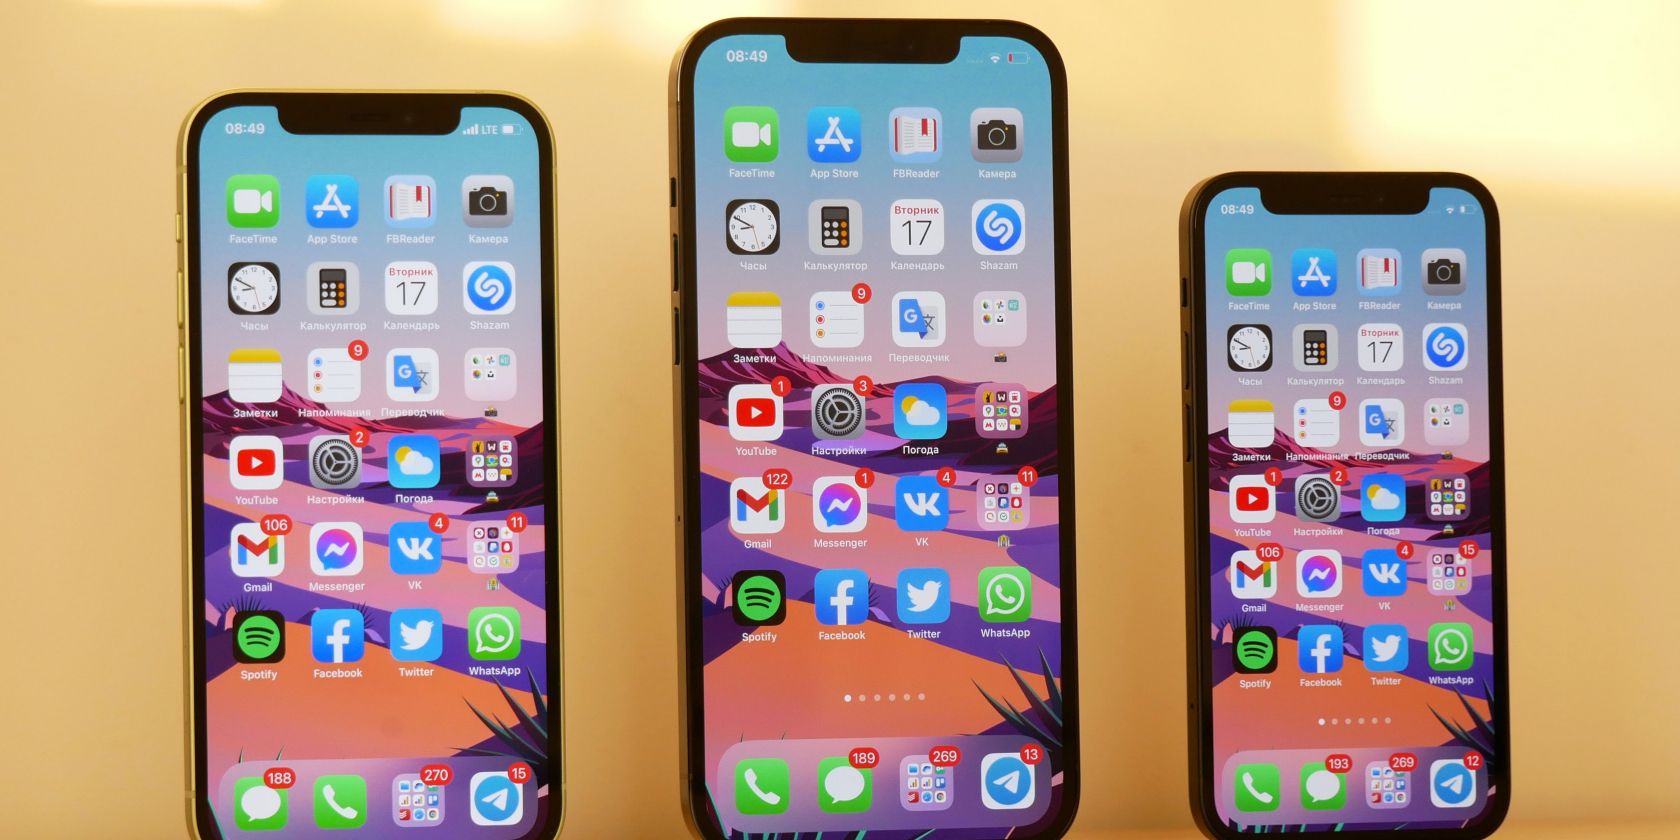 Photo of three phones with identical home screens stood next to each other